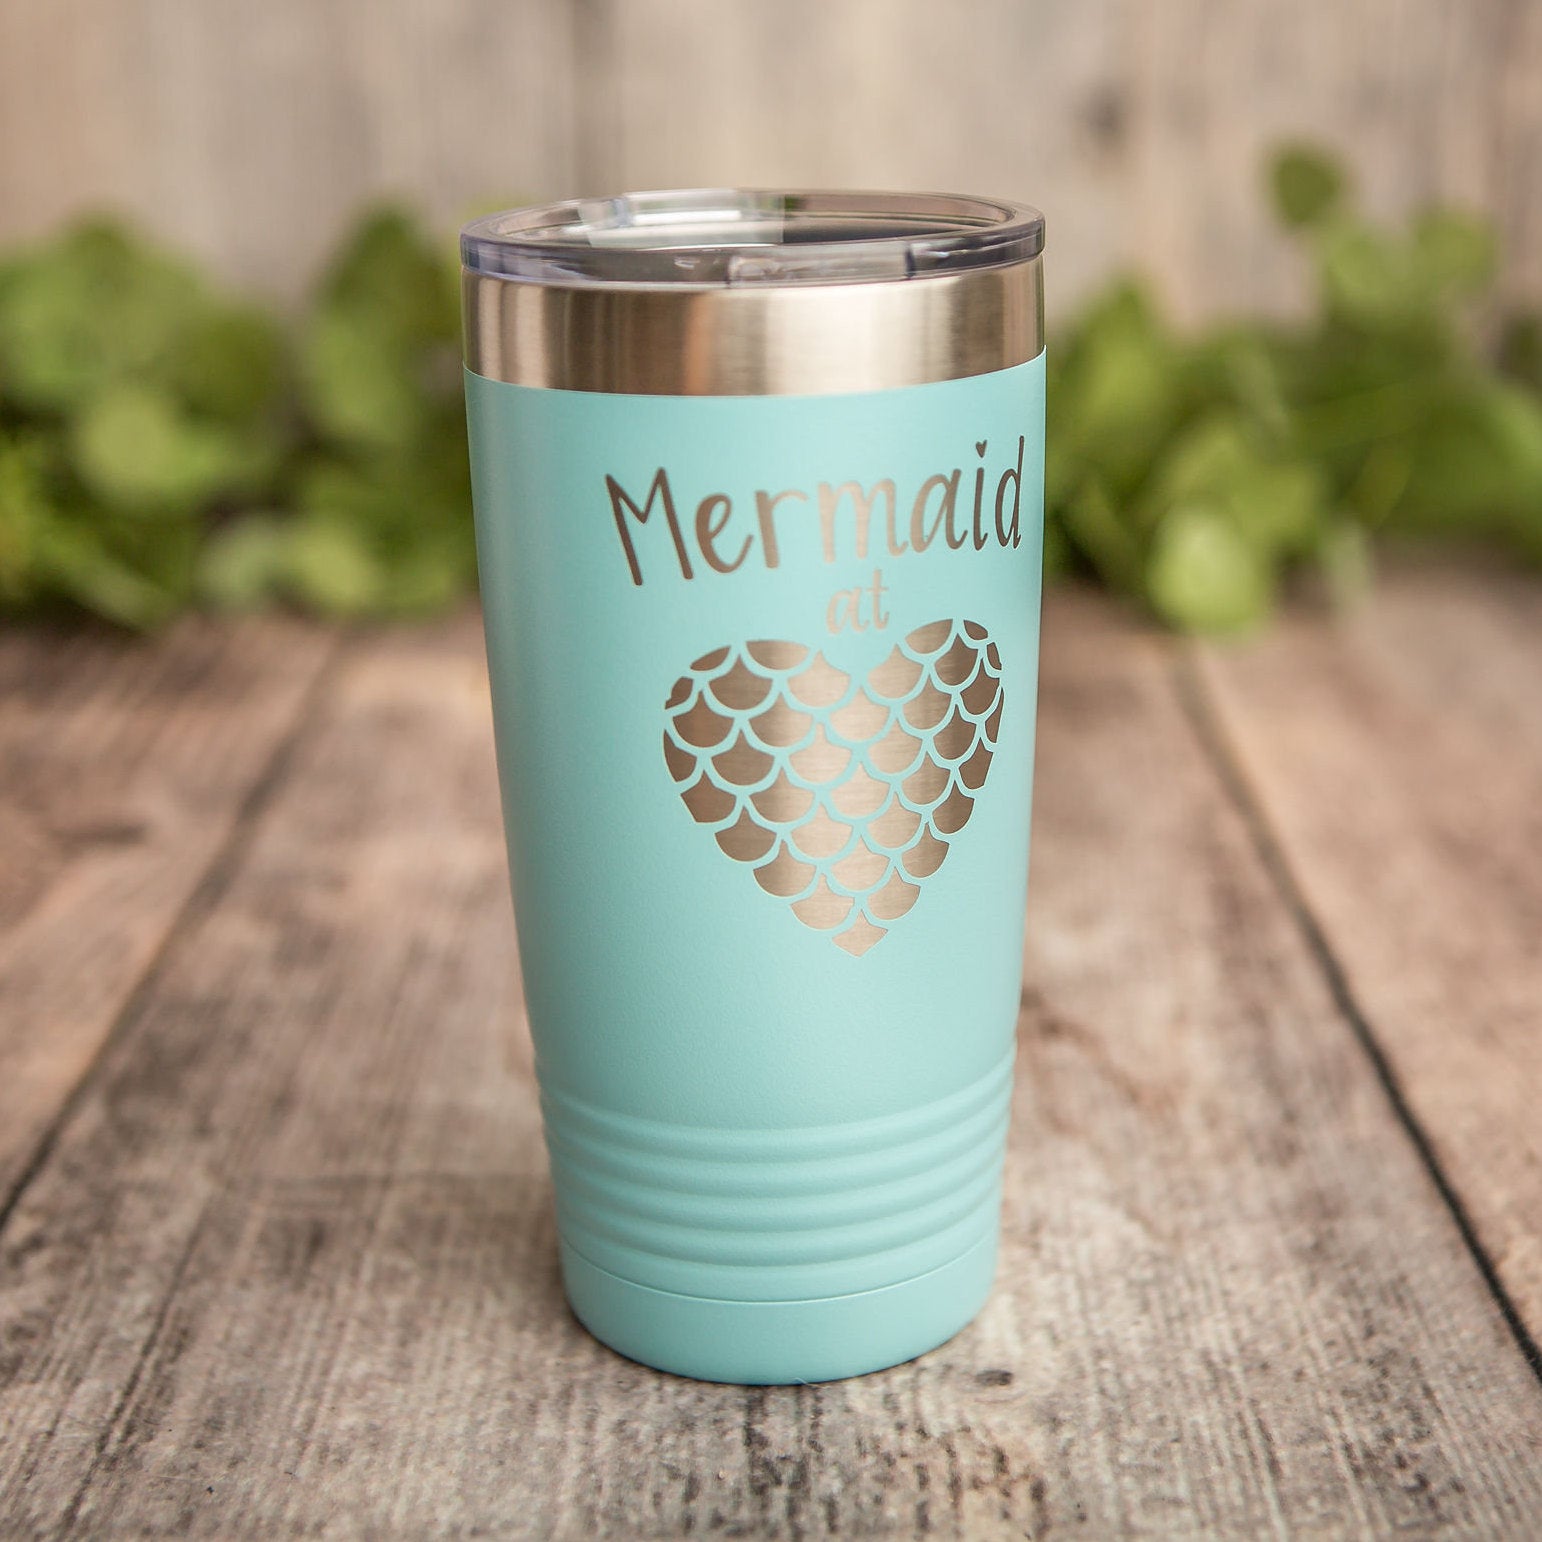 https://3cetching.com/wp-content/uploads/2020/09/mermaid-at-heart-engraved-stainless-steel-tumbler-yeti-style-cup-cute-girl-gift-5f5fc99a.jpg